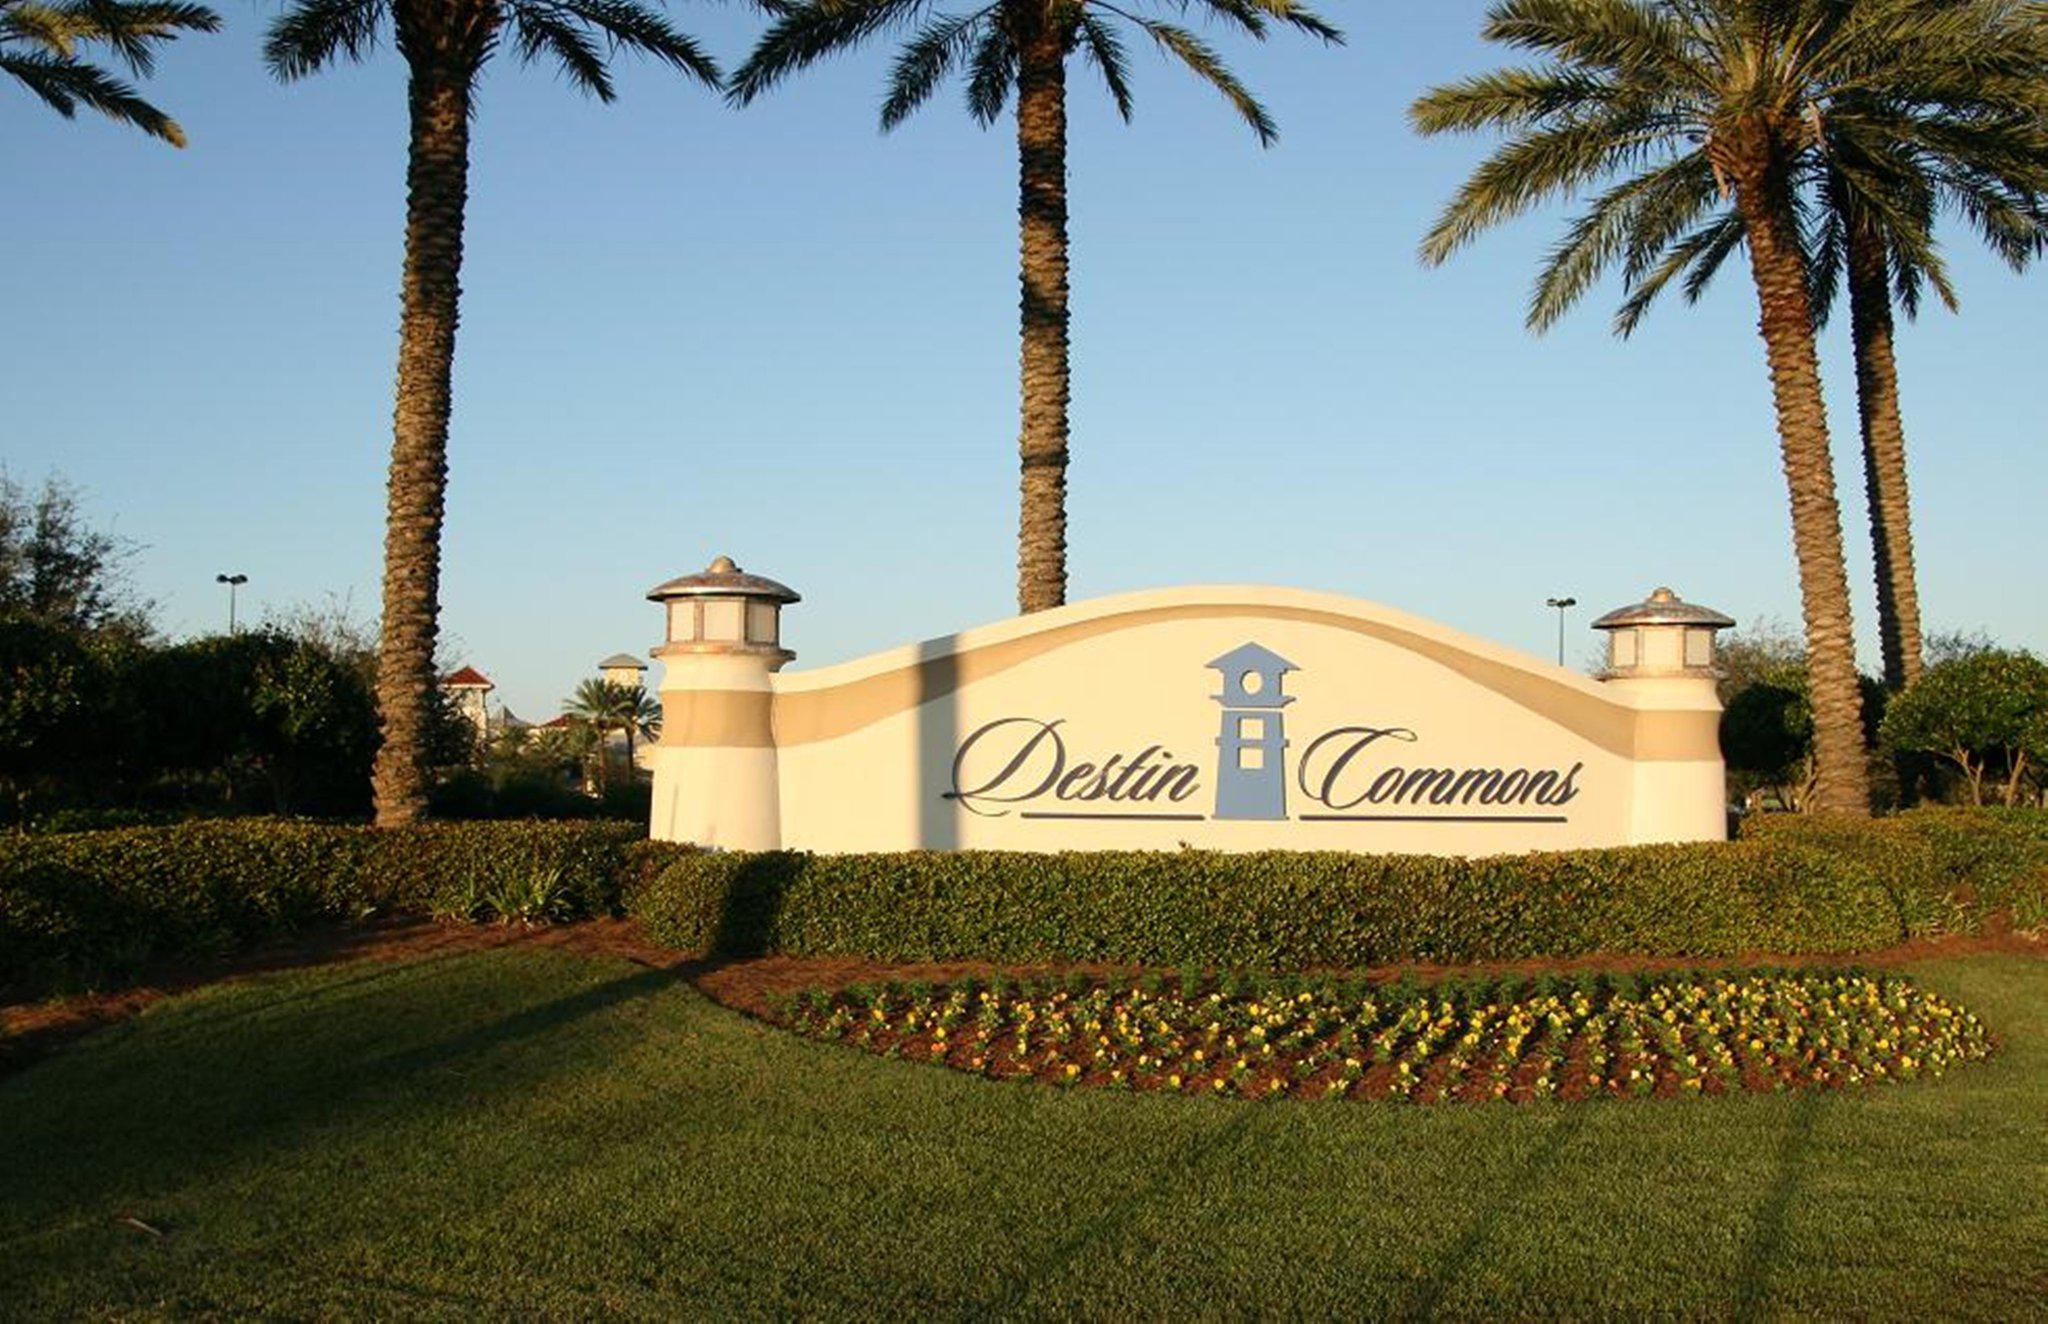 Holiday Inn Express & Suites Destin E - Commons Mall Area Photo